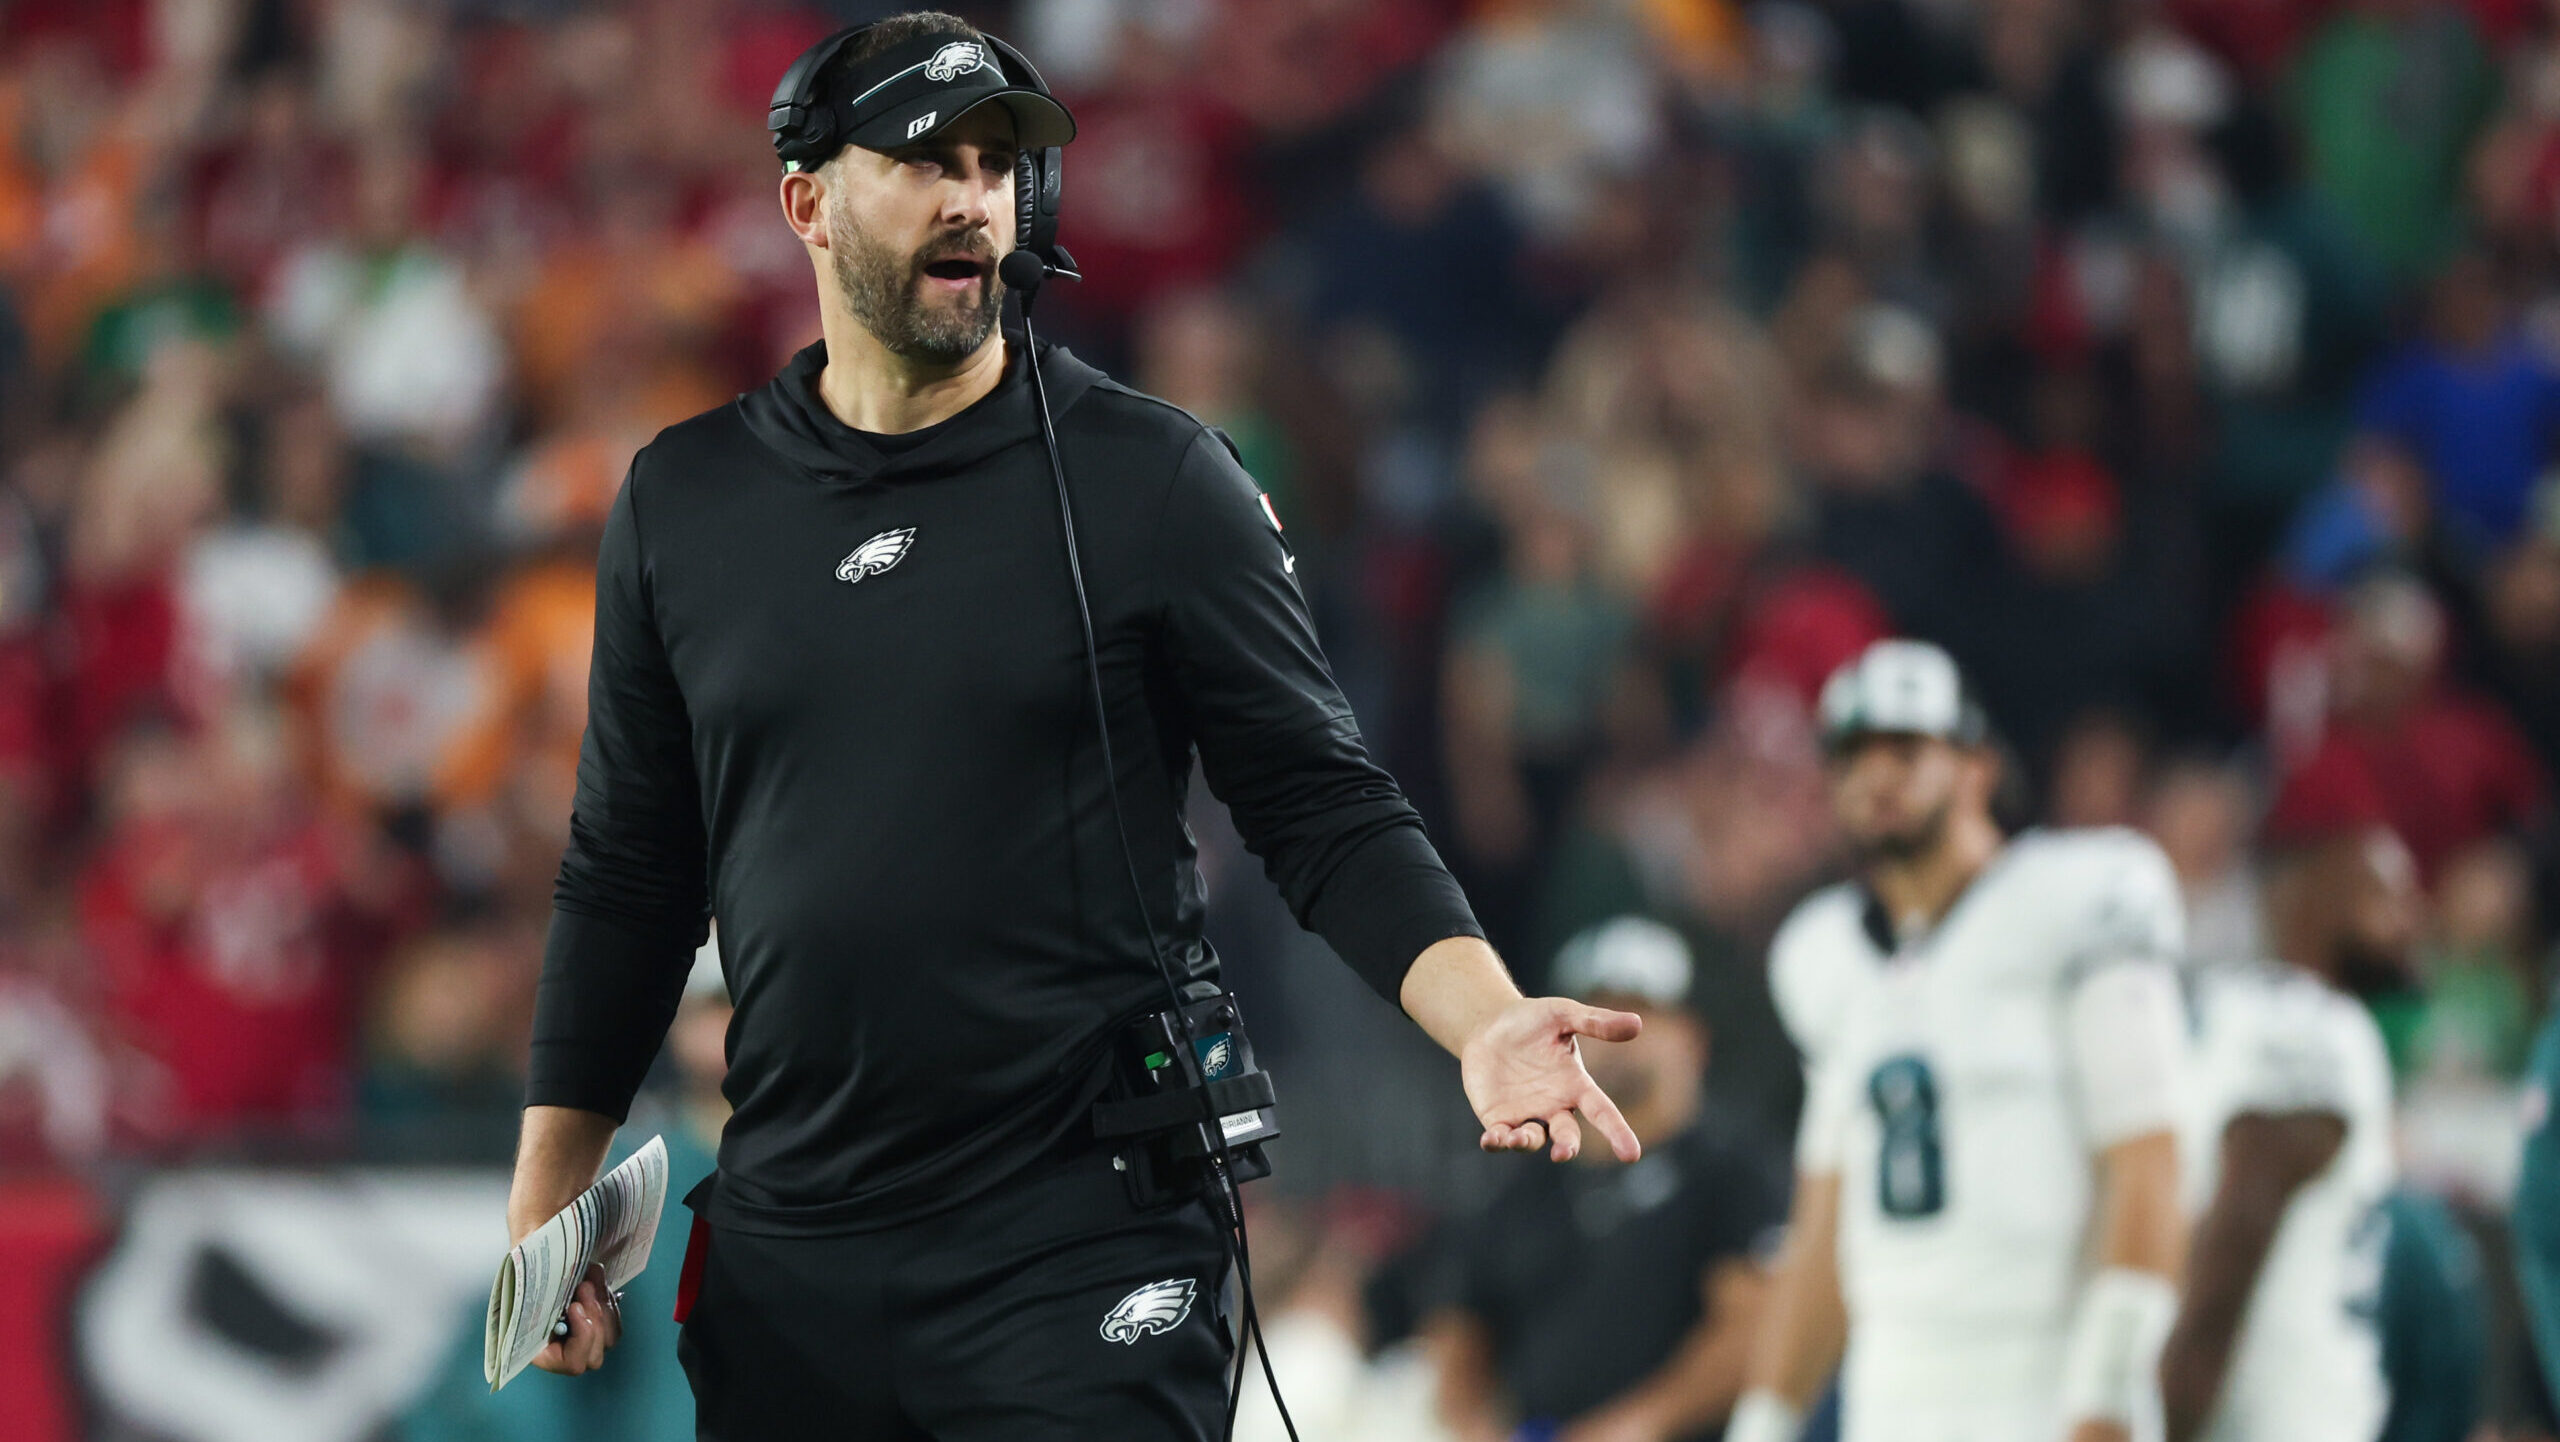 Nick Sirianni stands on field during Eagles loss to Bucaneers